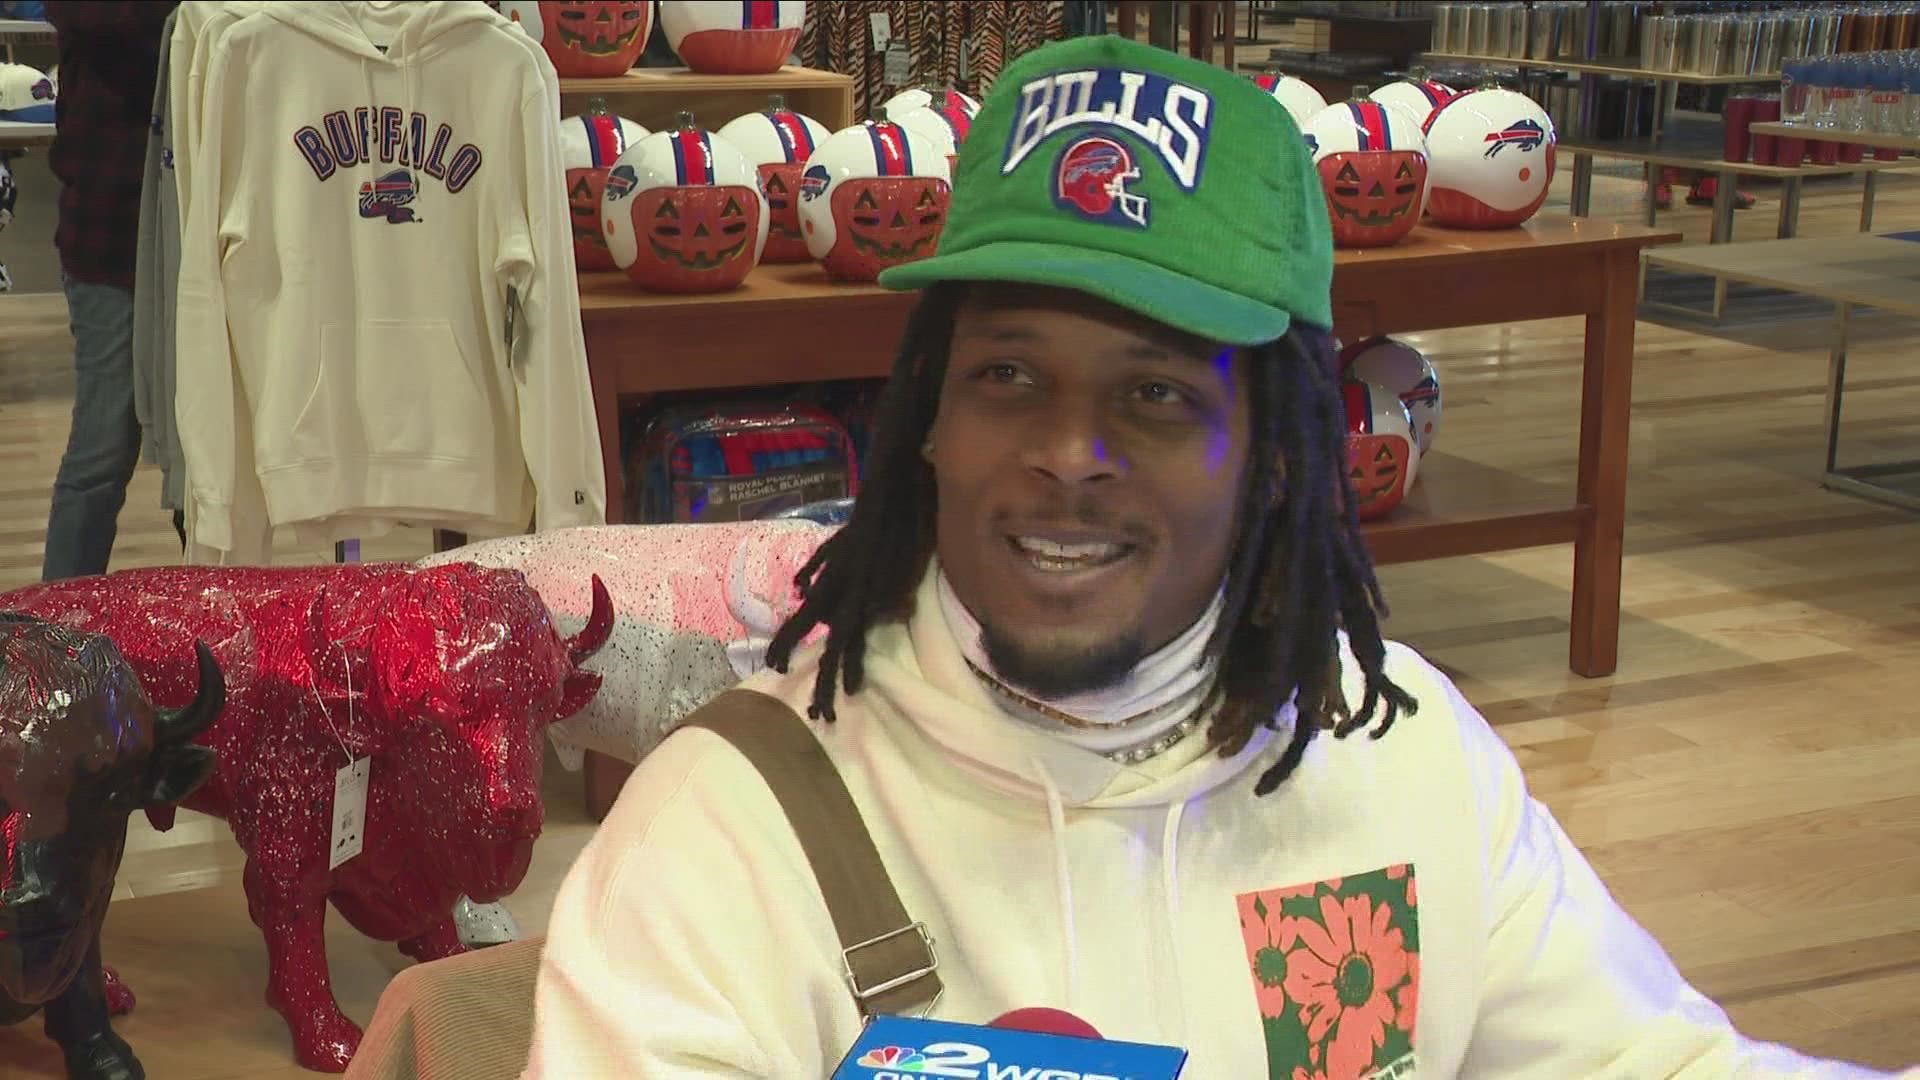 Former Buffalo receiver Stevie Johnson was at The BFLO Store at Transitown Plaza on Saturday for a free autograph signing session.